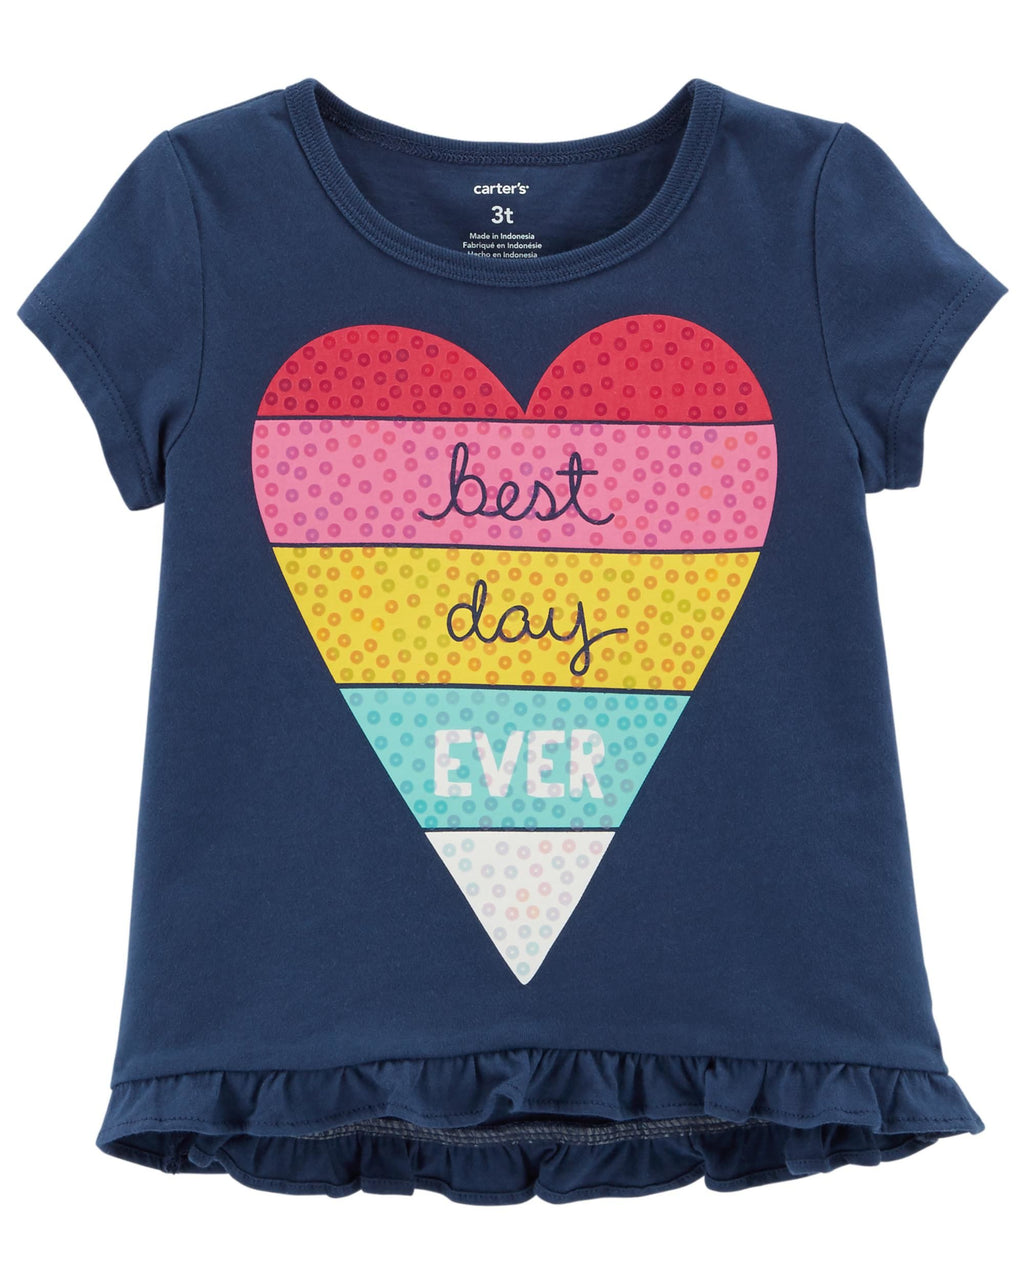 Remera CARTERS Best Day Ever Hi-Lo Matchtastic Tee